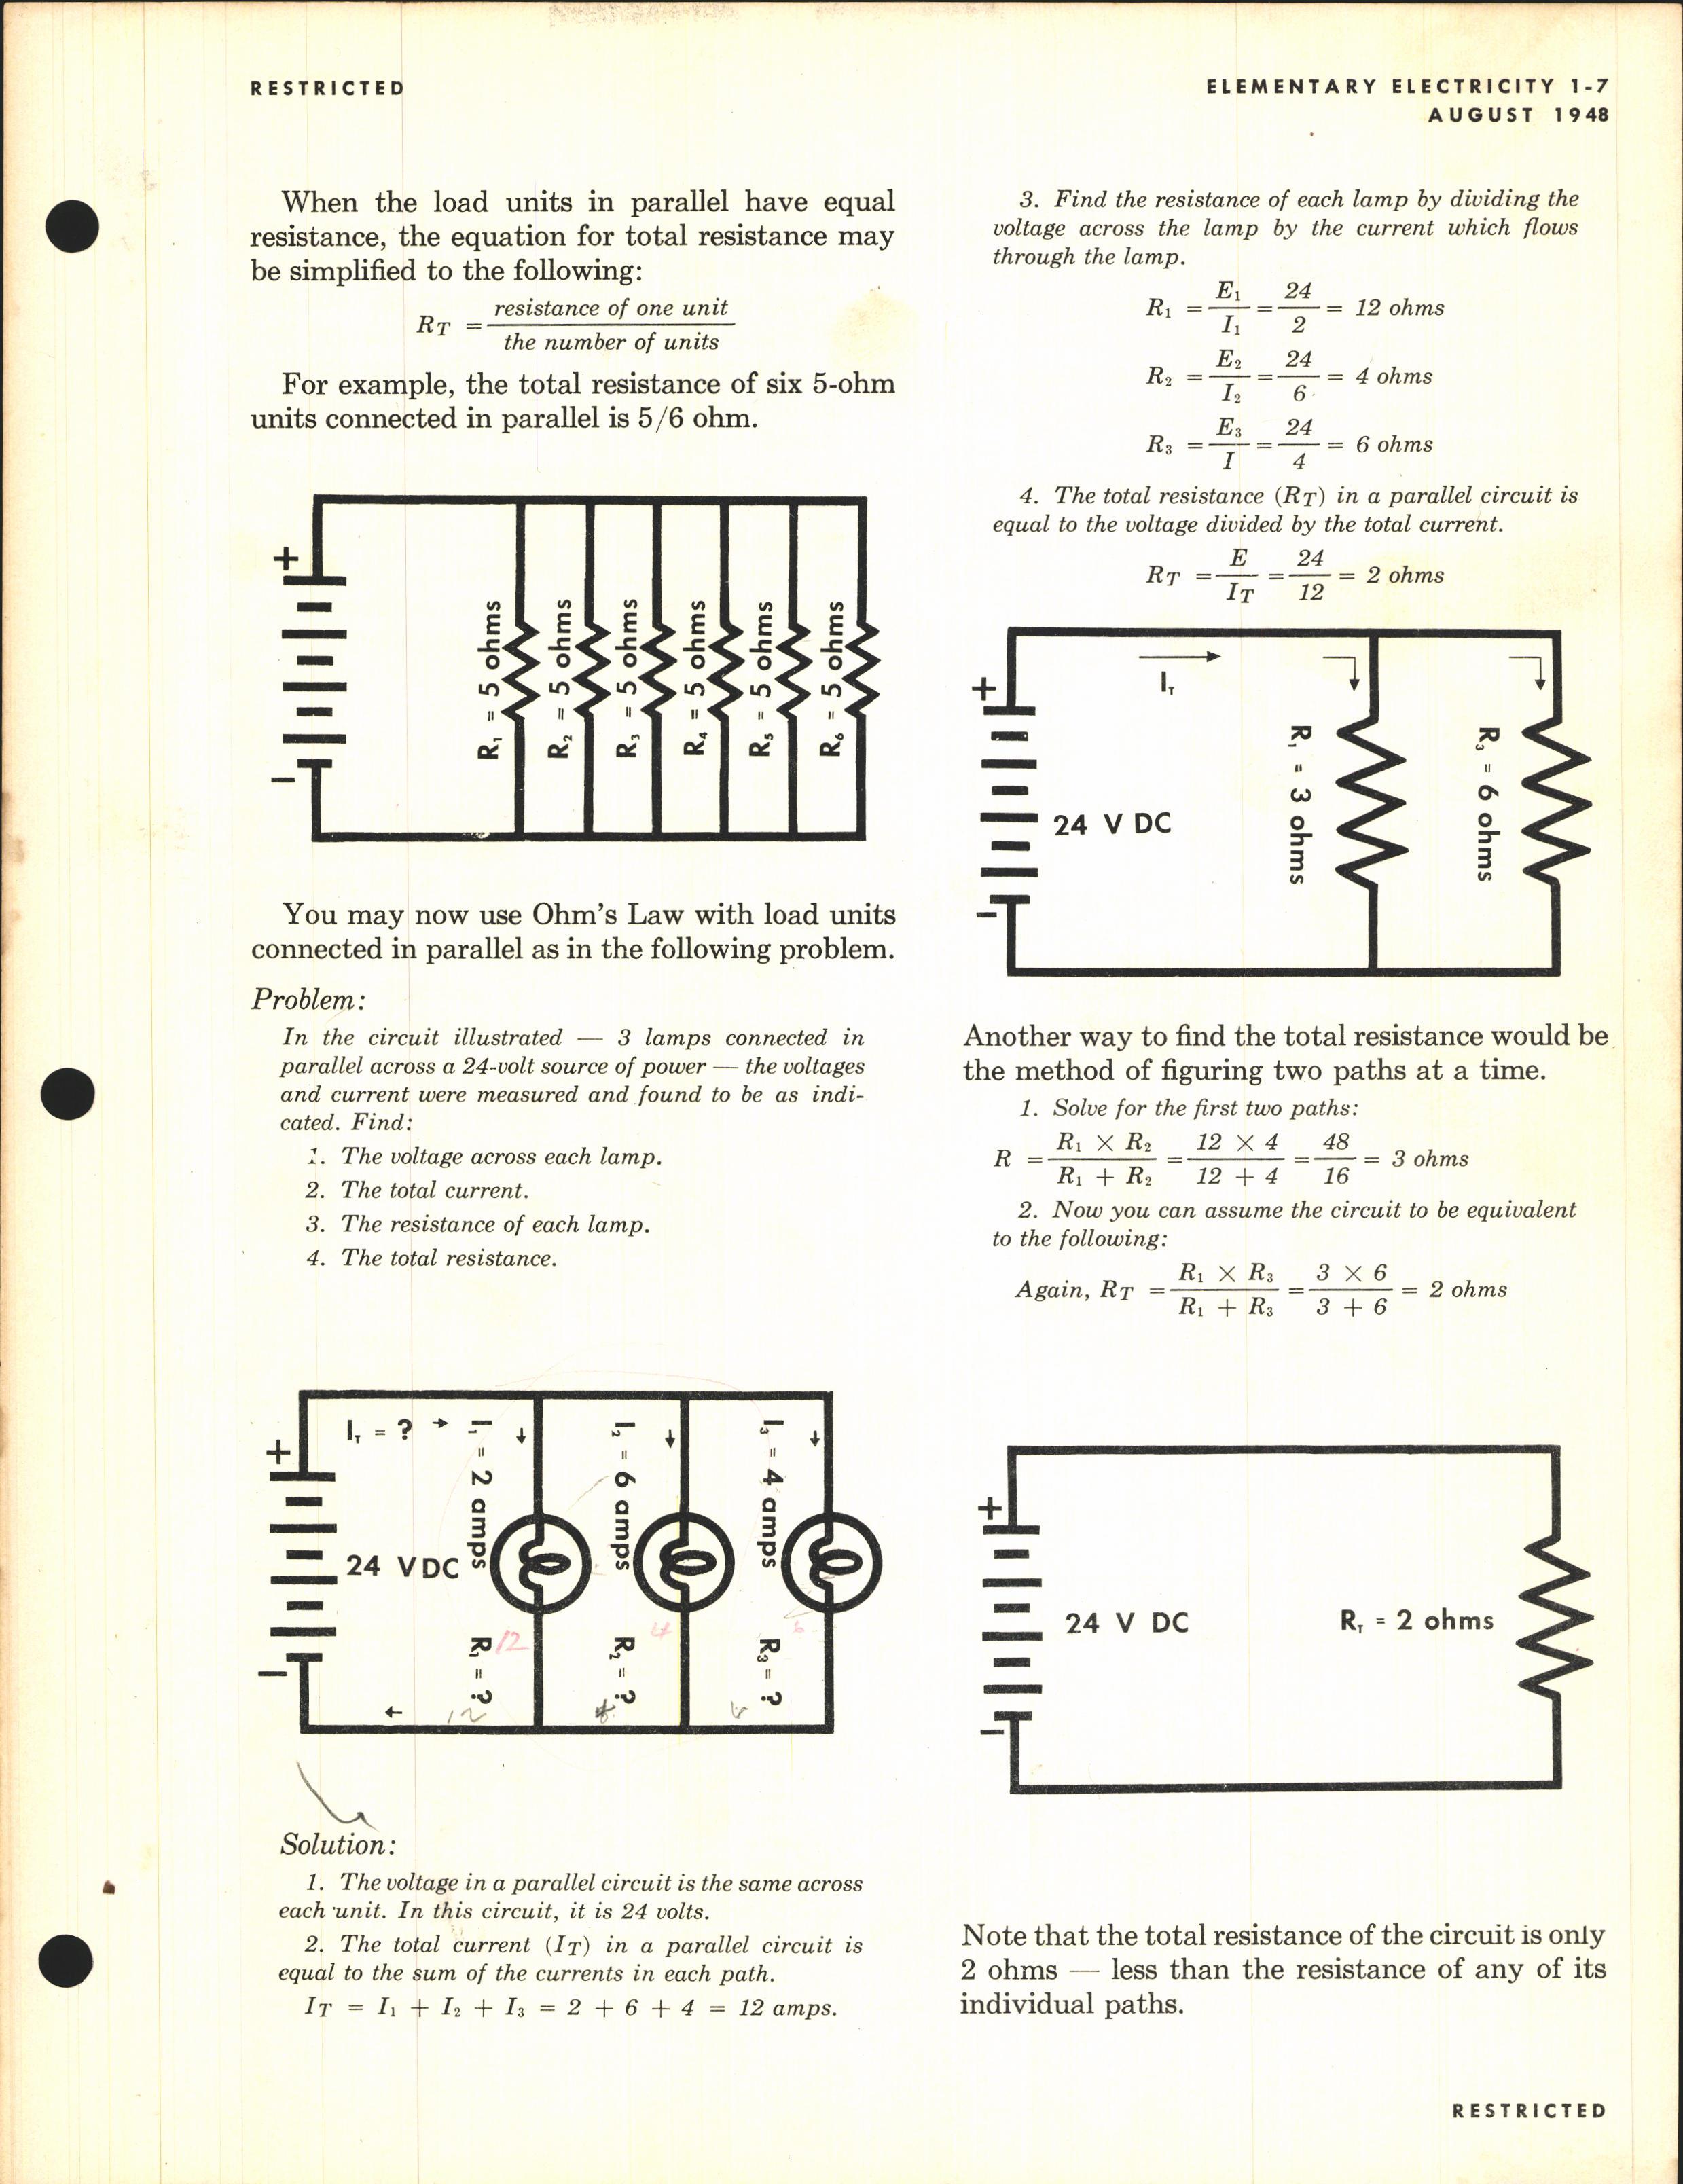 Sample page 15 from AirCorps Library document: Elementary Electricity for Airplane Mechanics